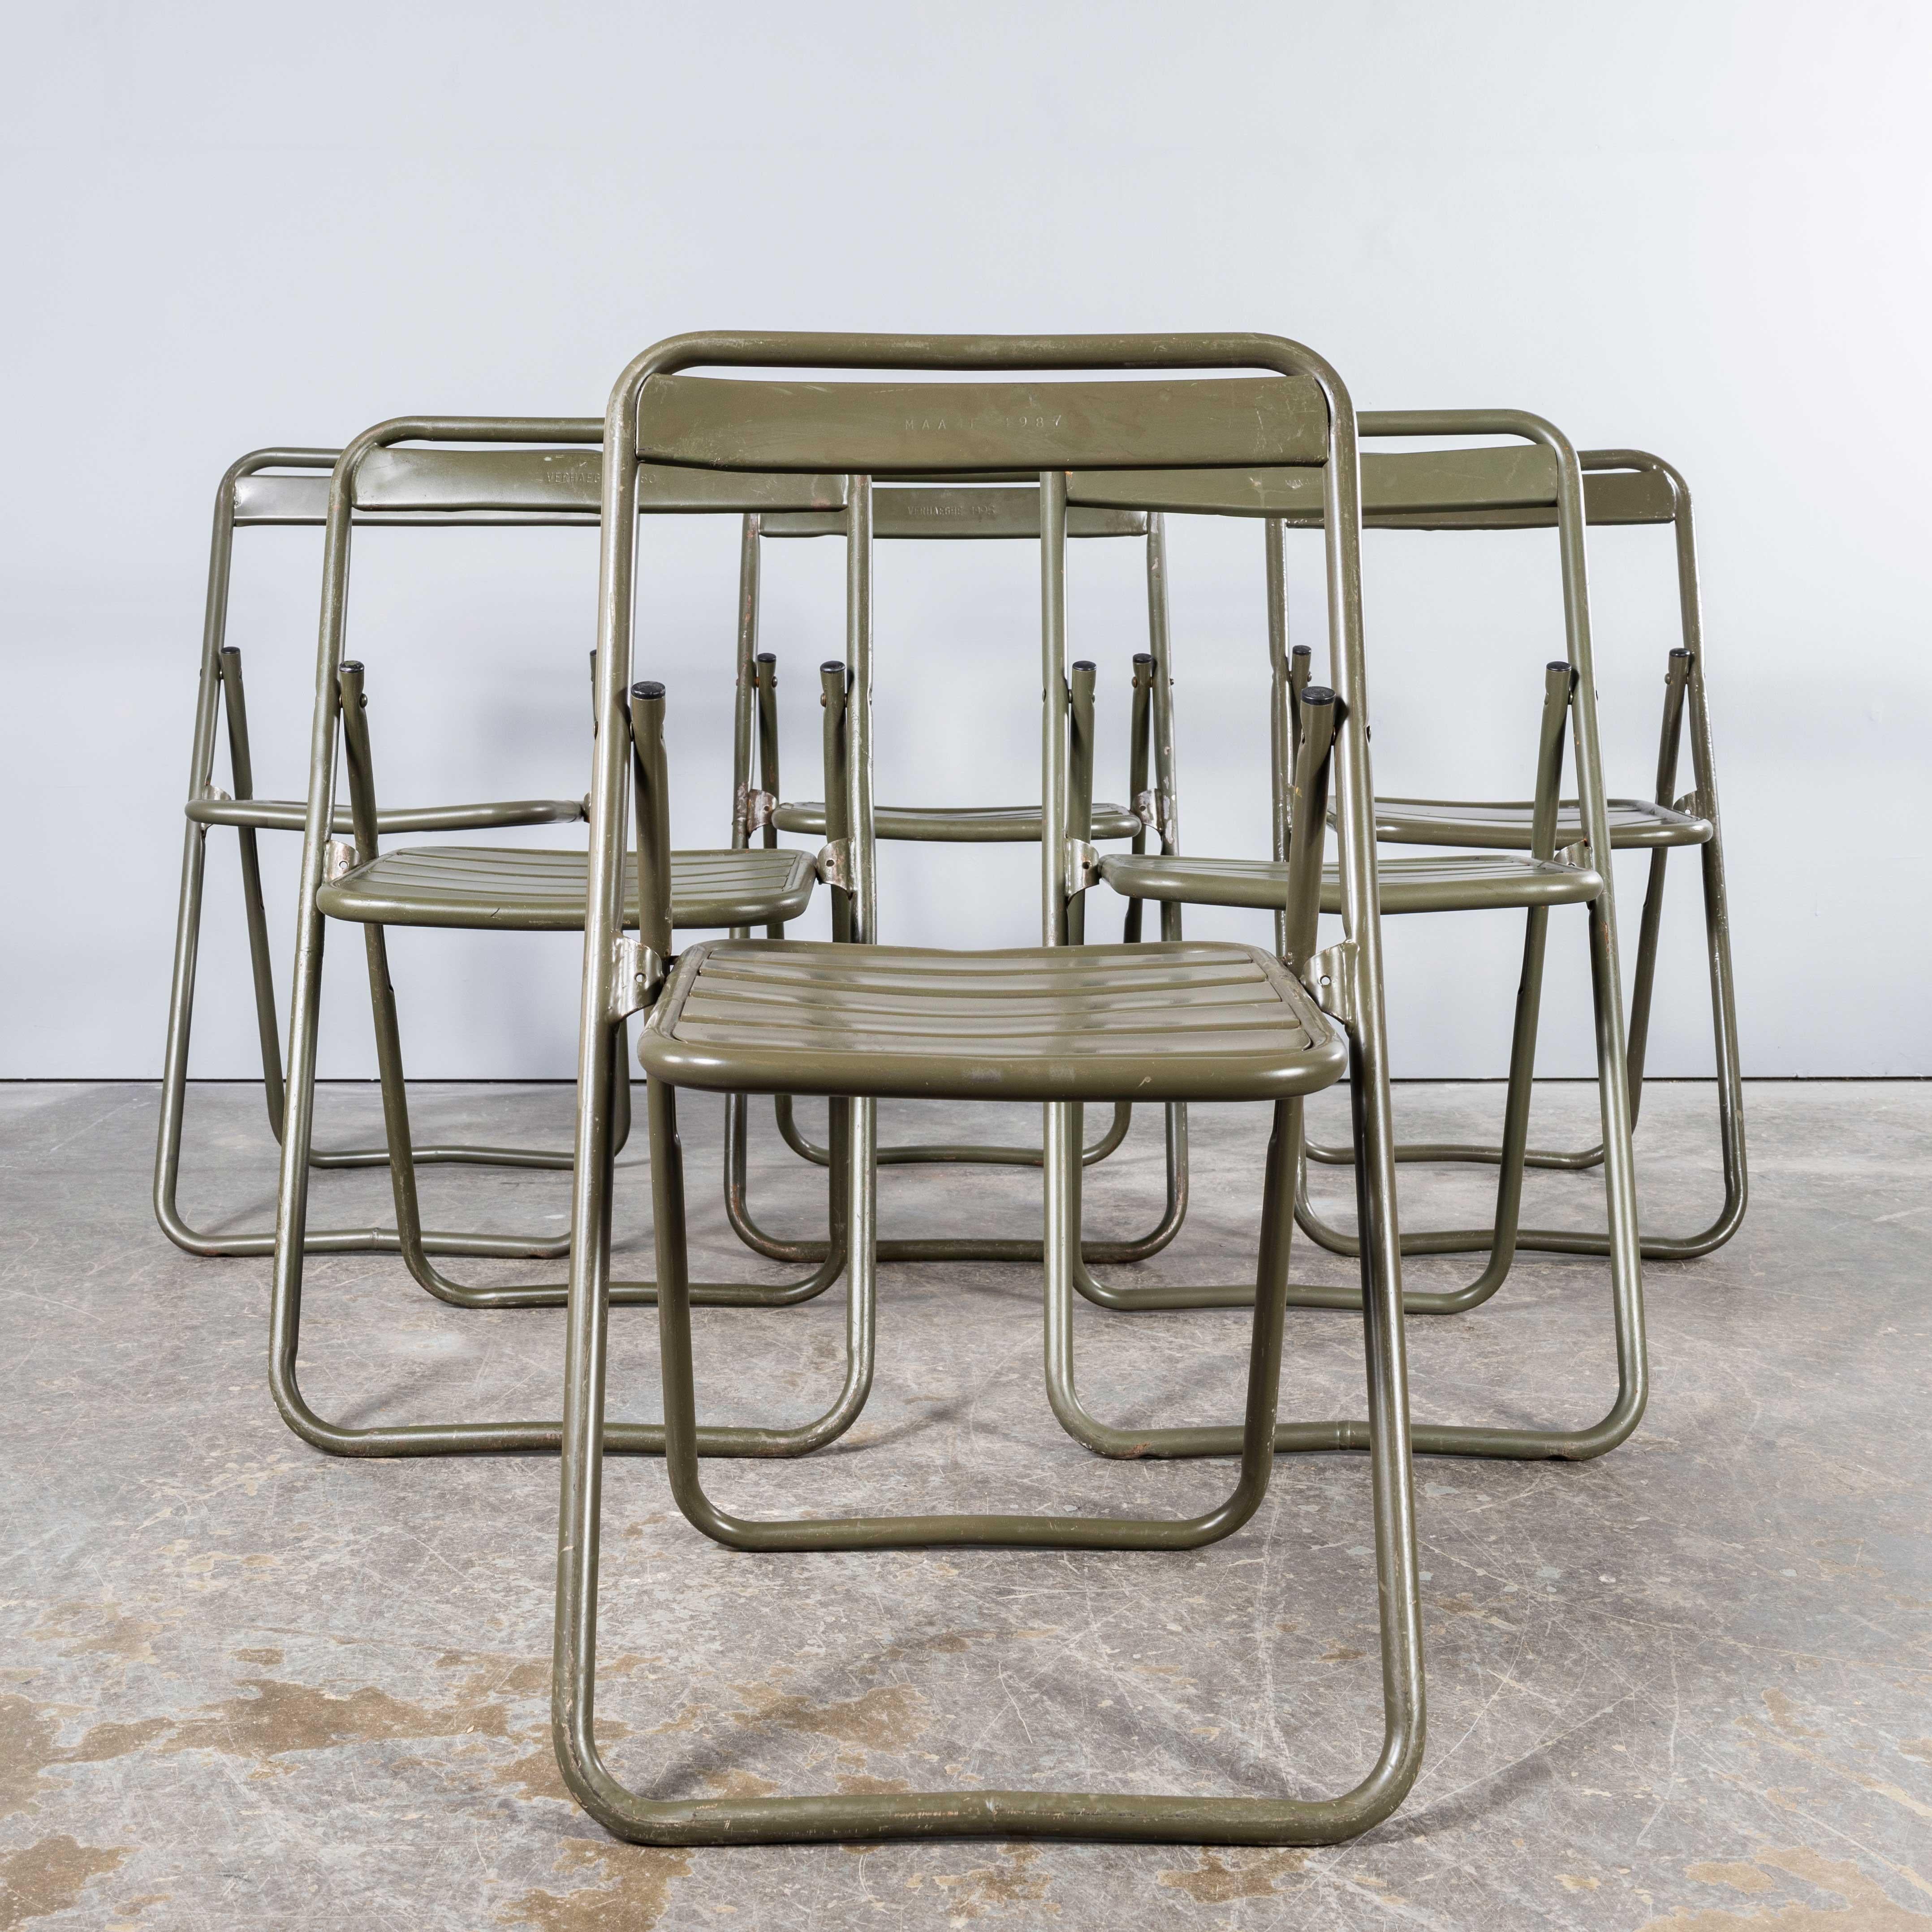 1970's New Old Stock Original French Army Surplus Folding Chairs - Very Large Qu For Sale 1